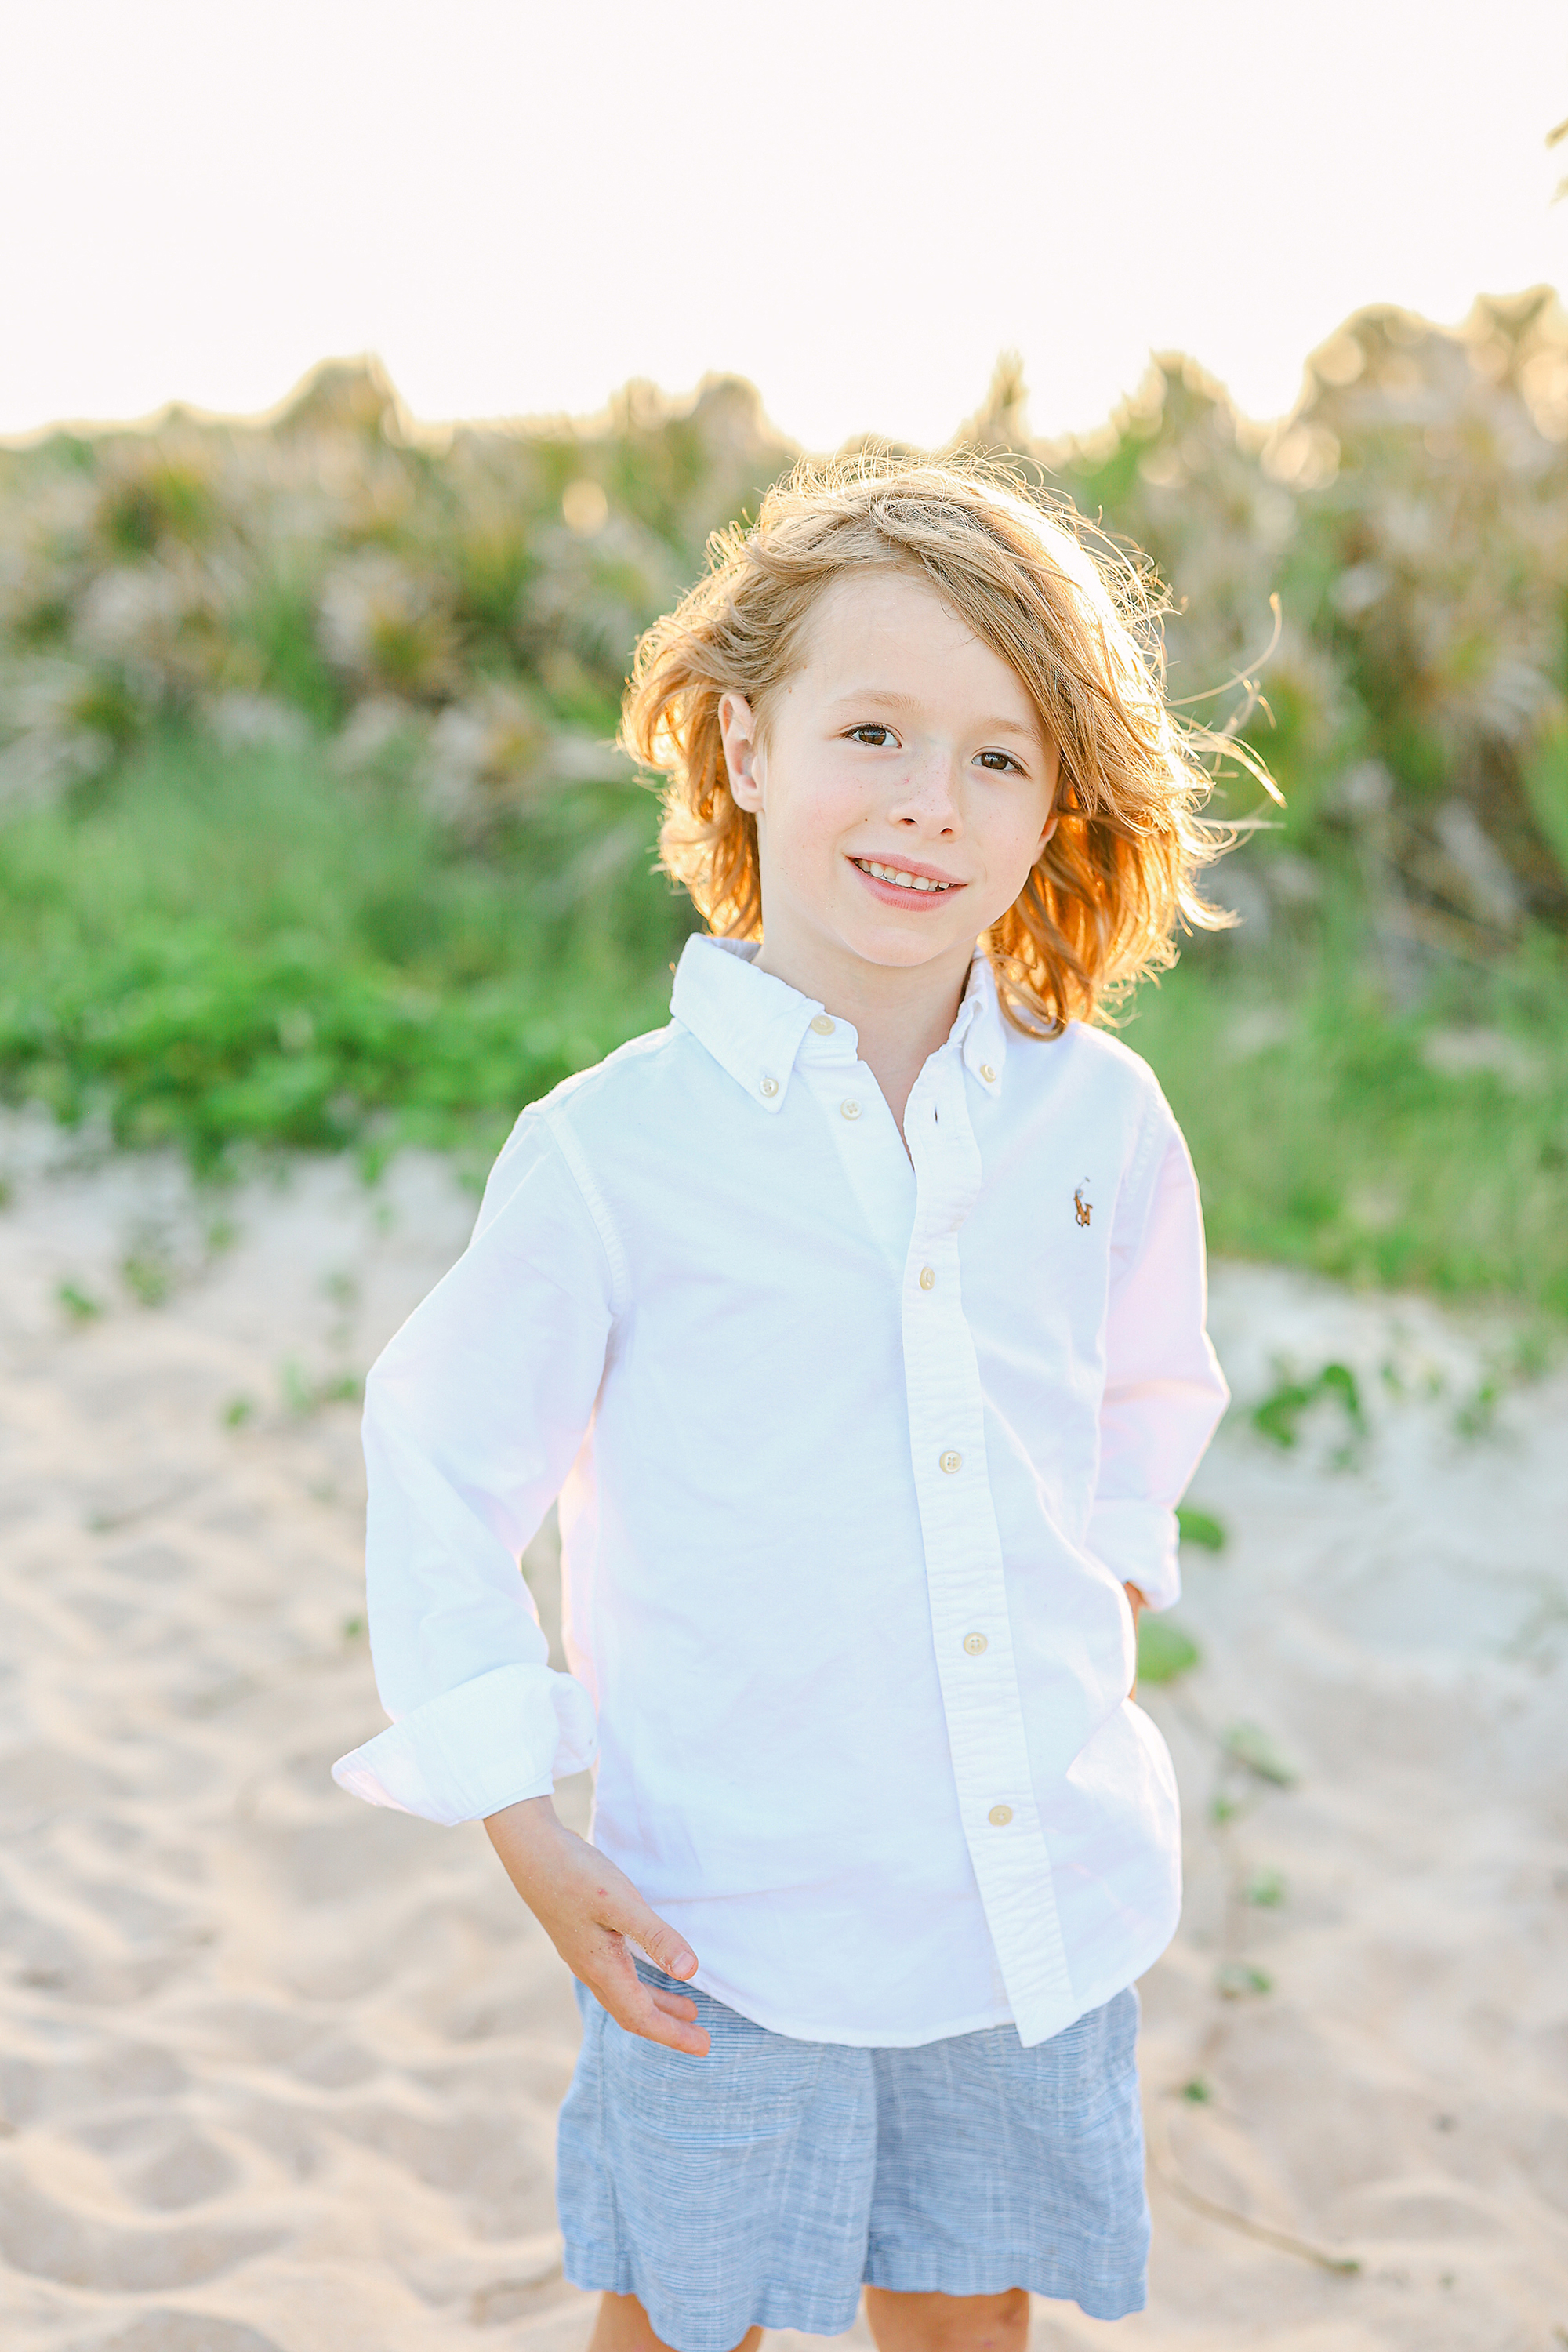 Little boy with long hair in white shirt standing on the beach at sunset.